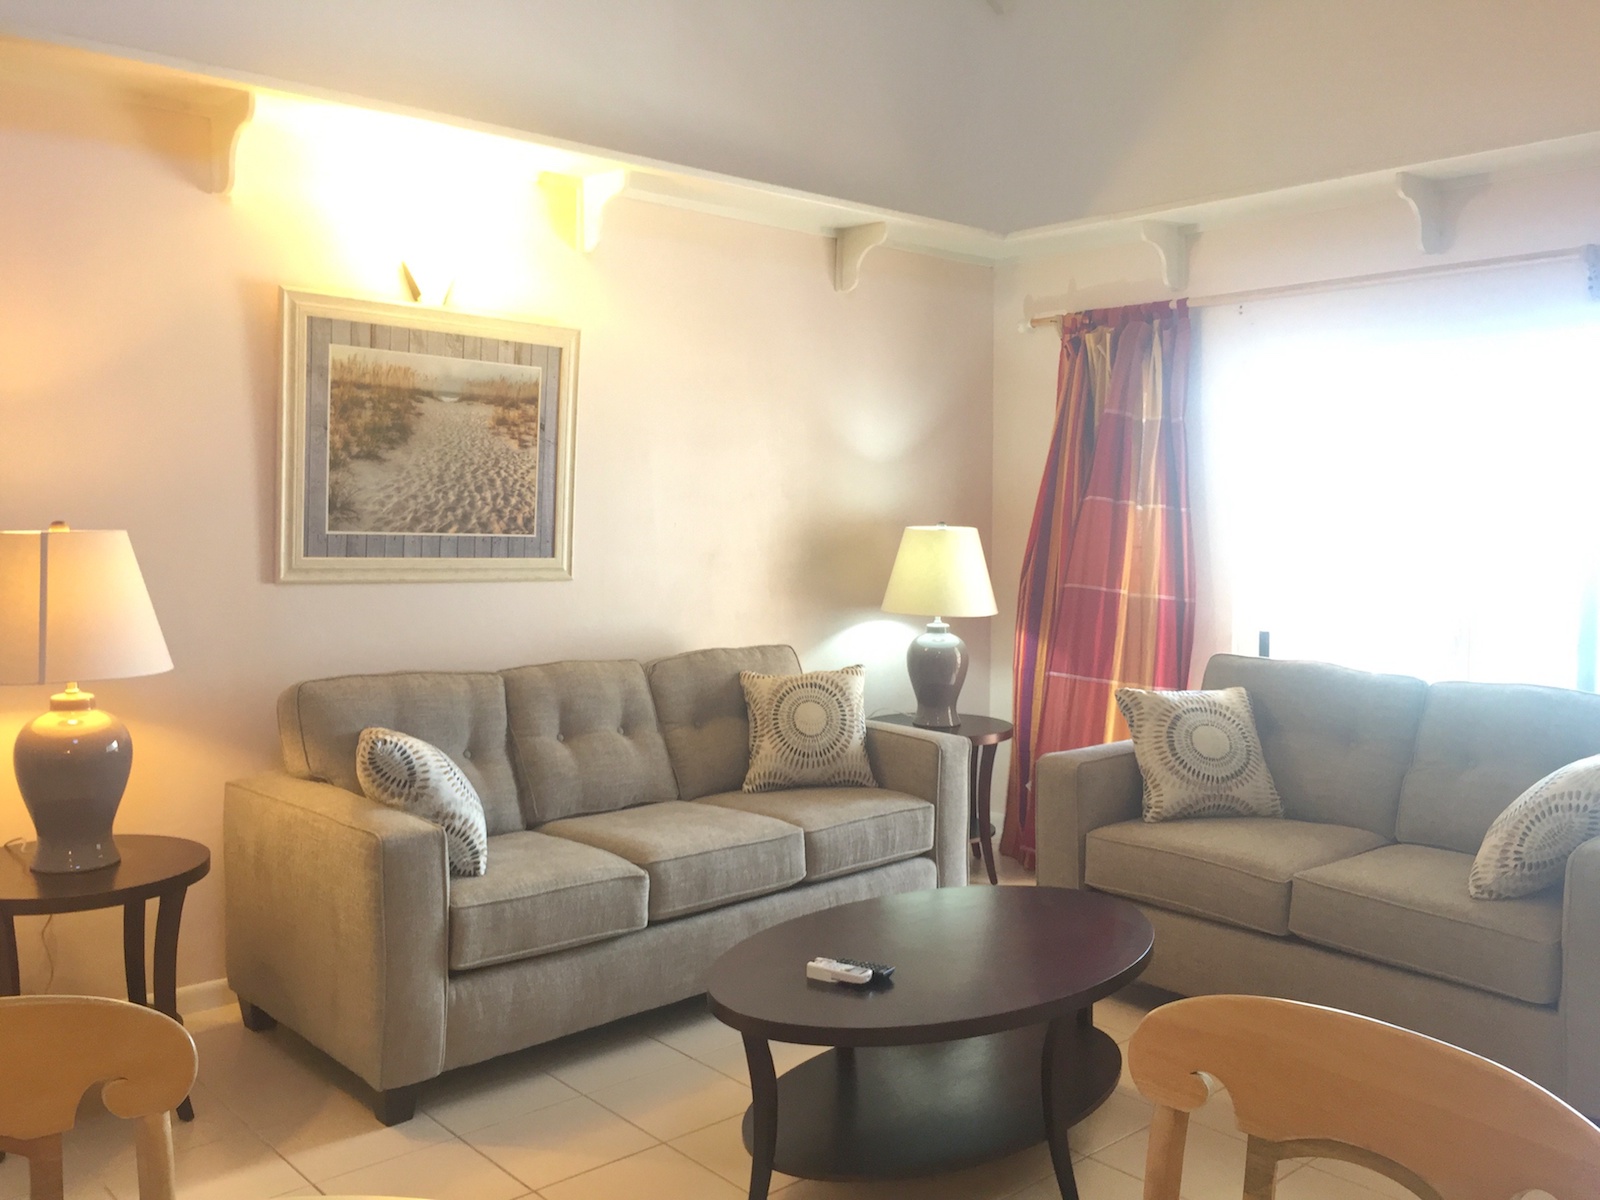 Dining room and living area in the Leeward Cove Second Floor 2 Bedroom / 2 Bathroom condo for sale, St. Kitts 